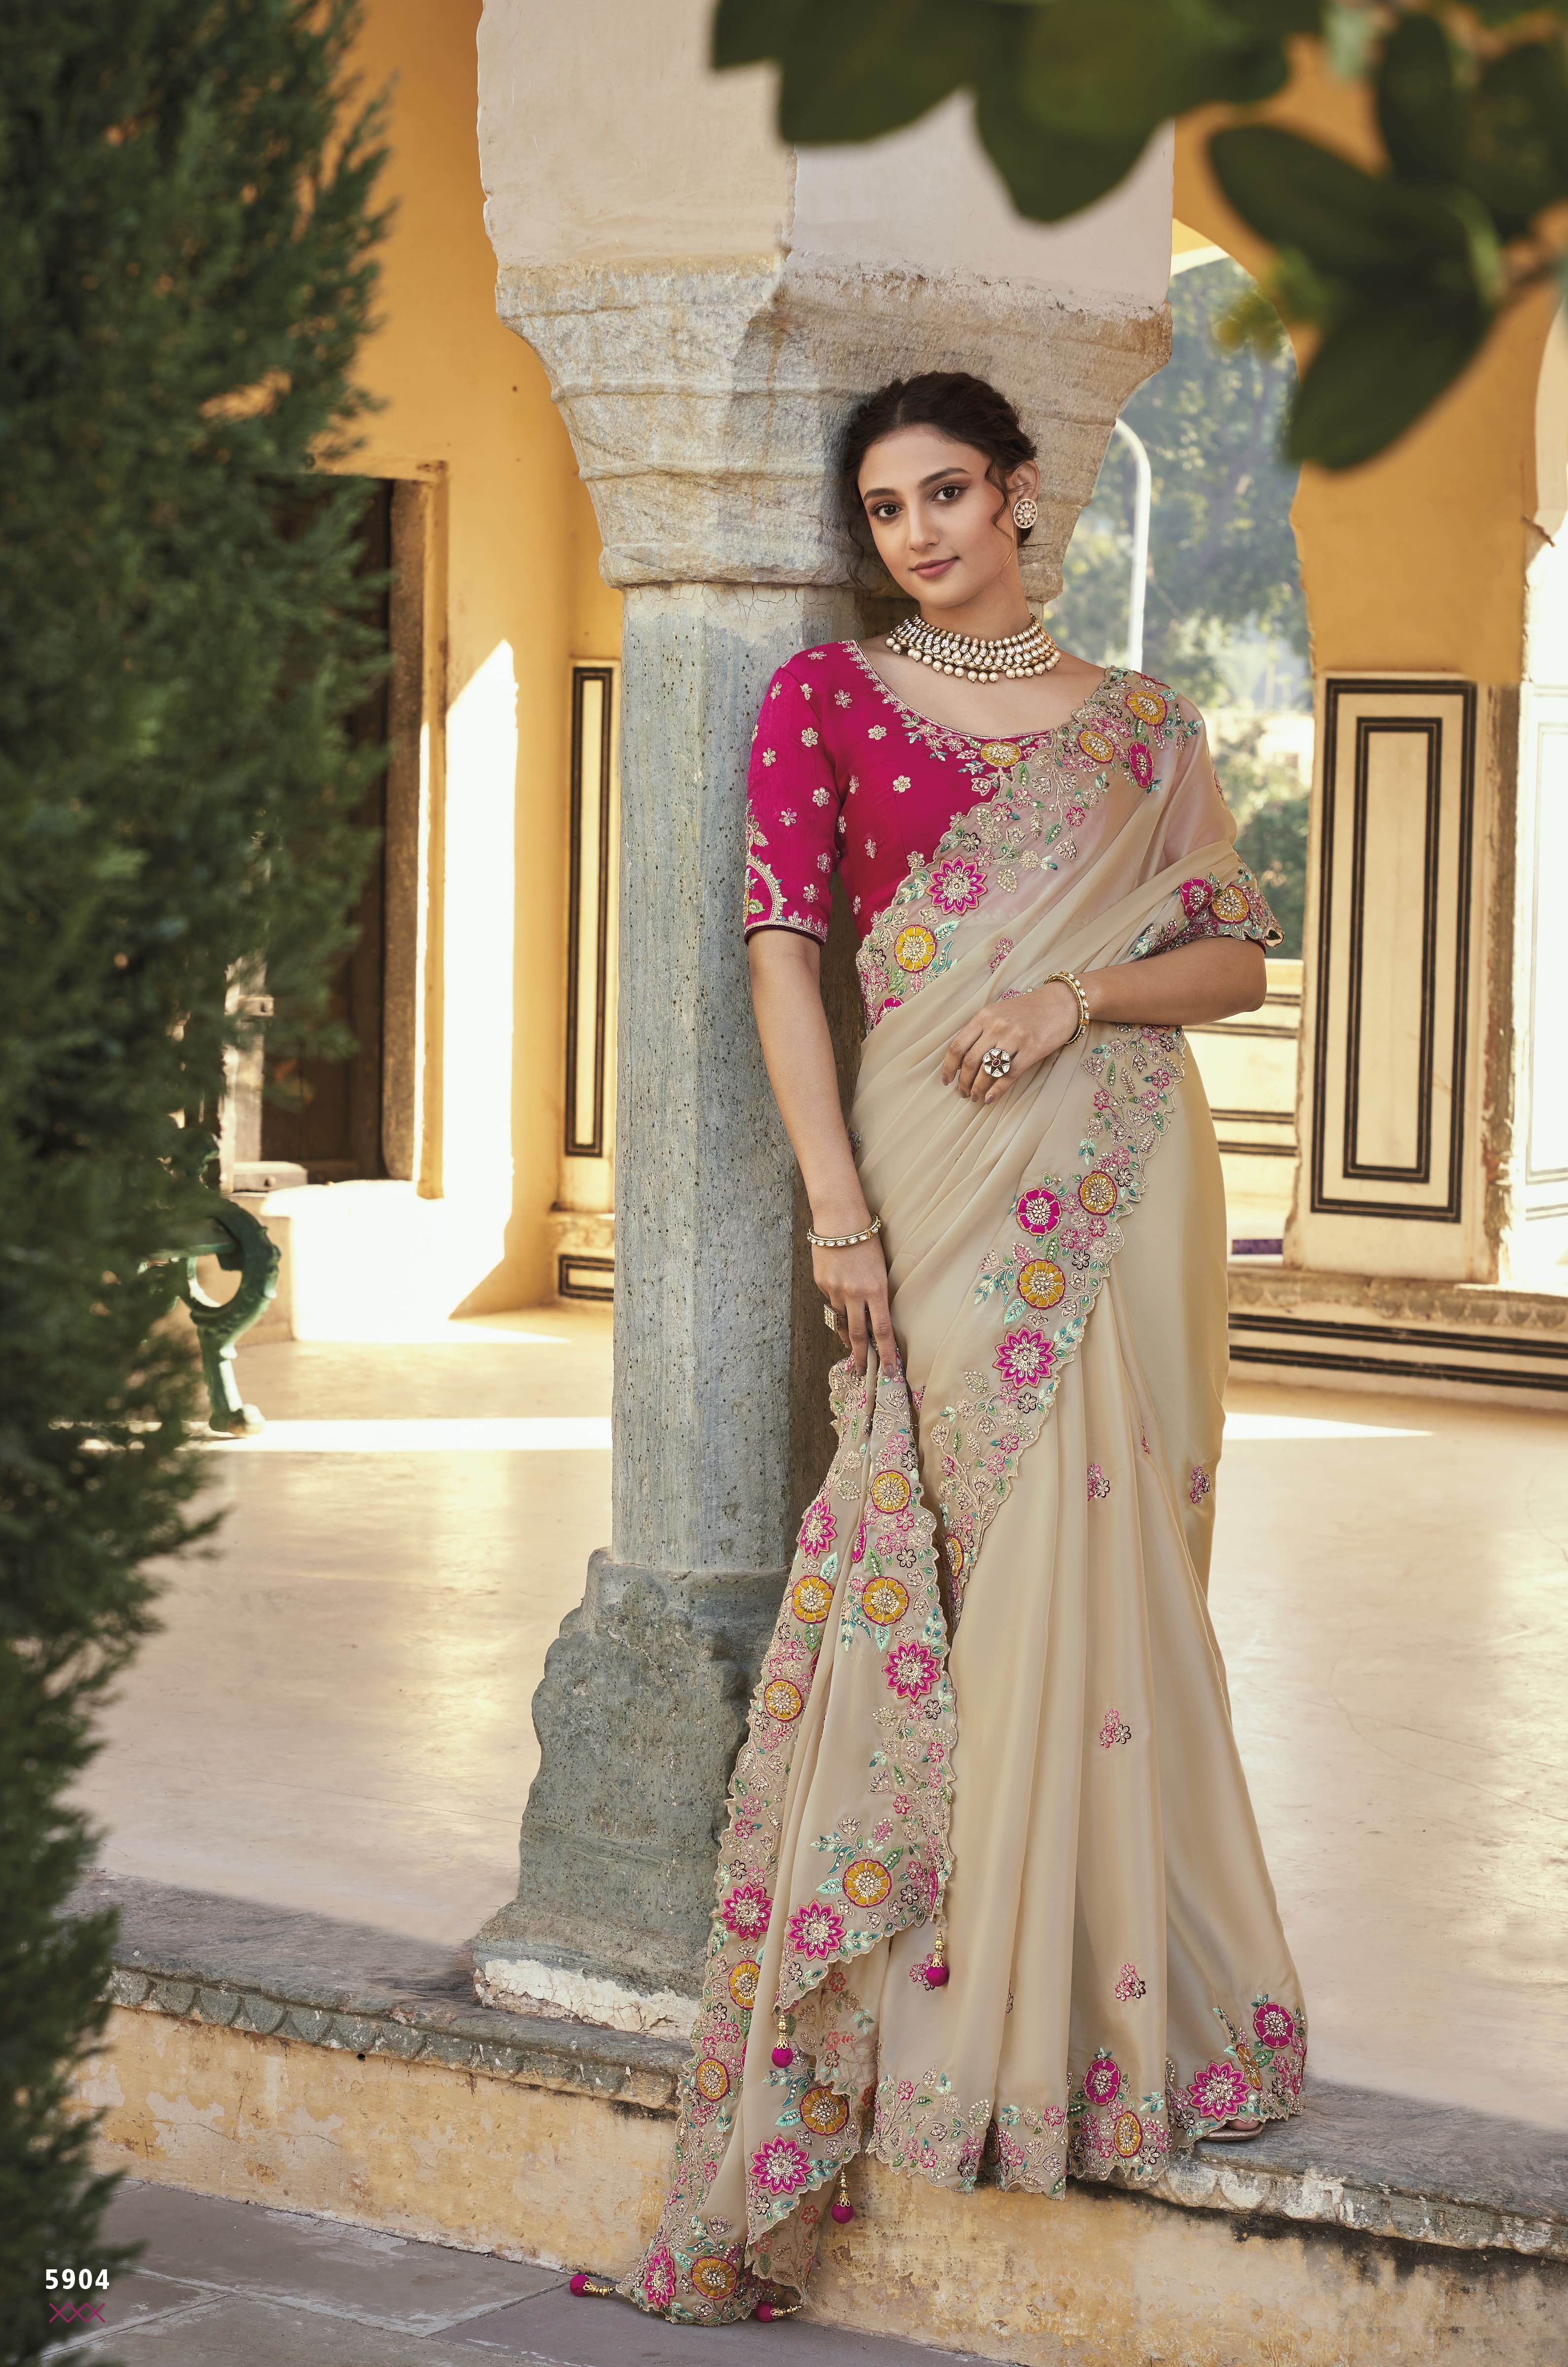 Engrossing Traditional Saree For Engagement